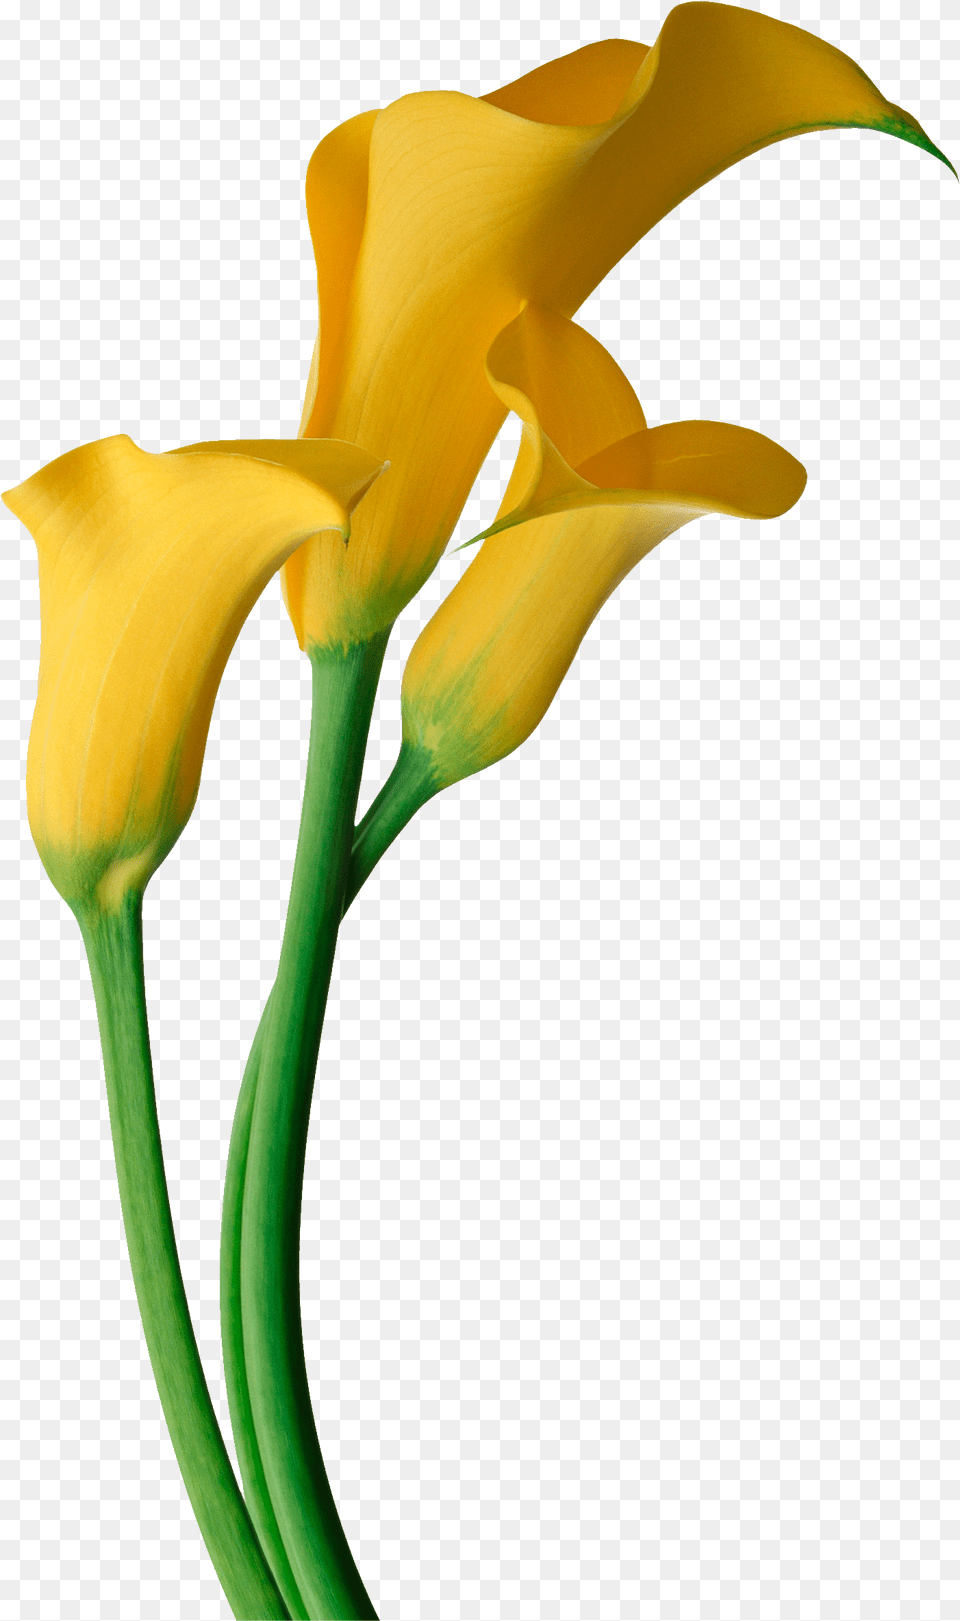 Lily Of The Valley Drawing Free Download Yellow Calla Lily Flower, Plant, Petal Png